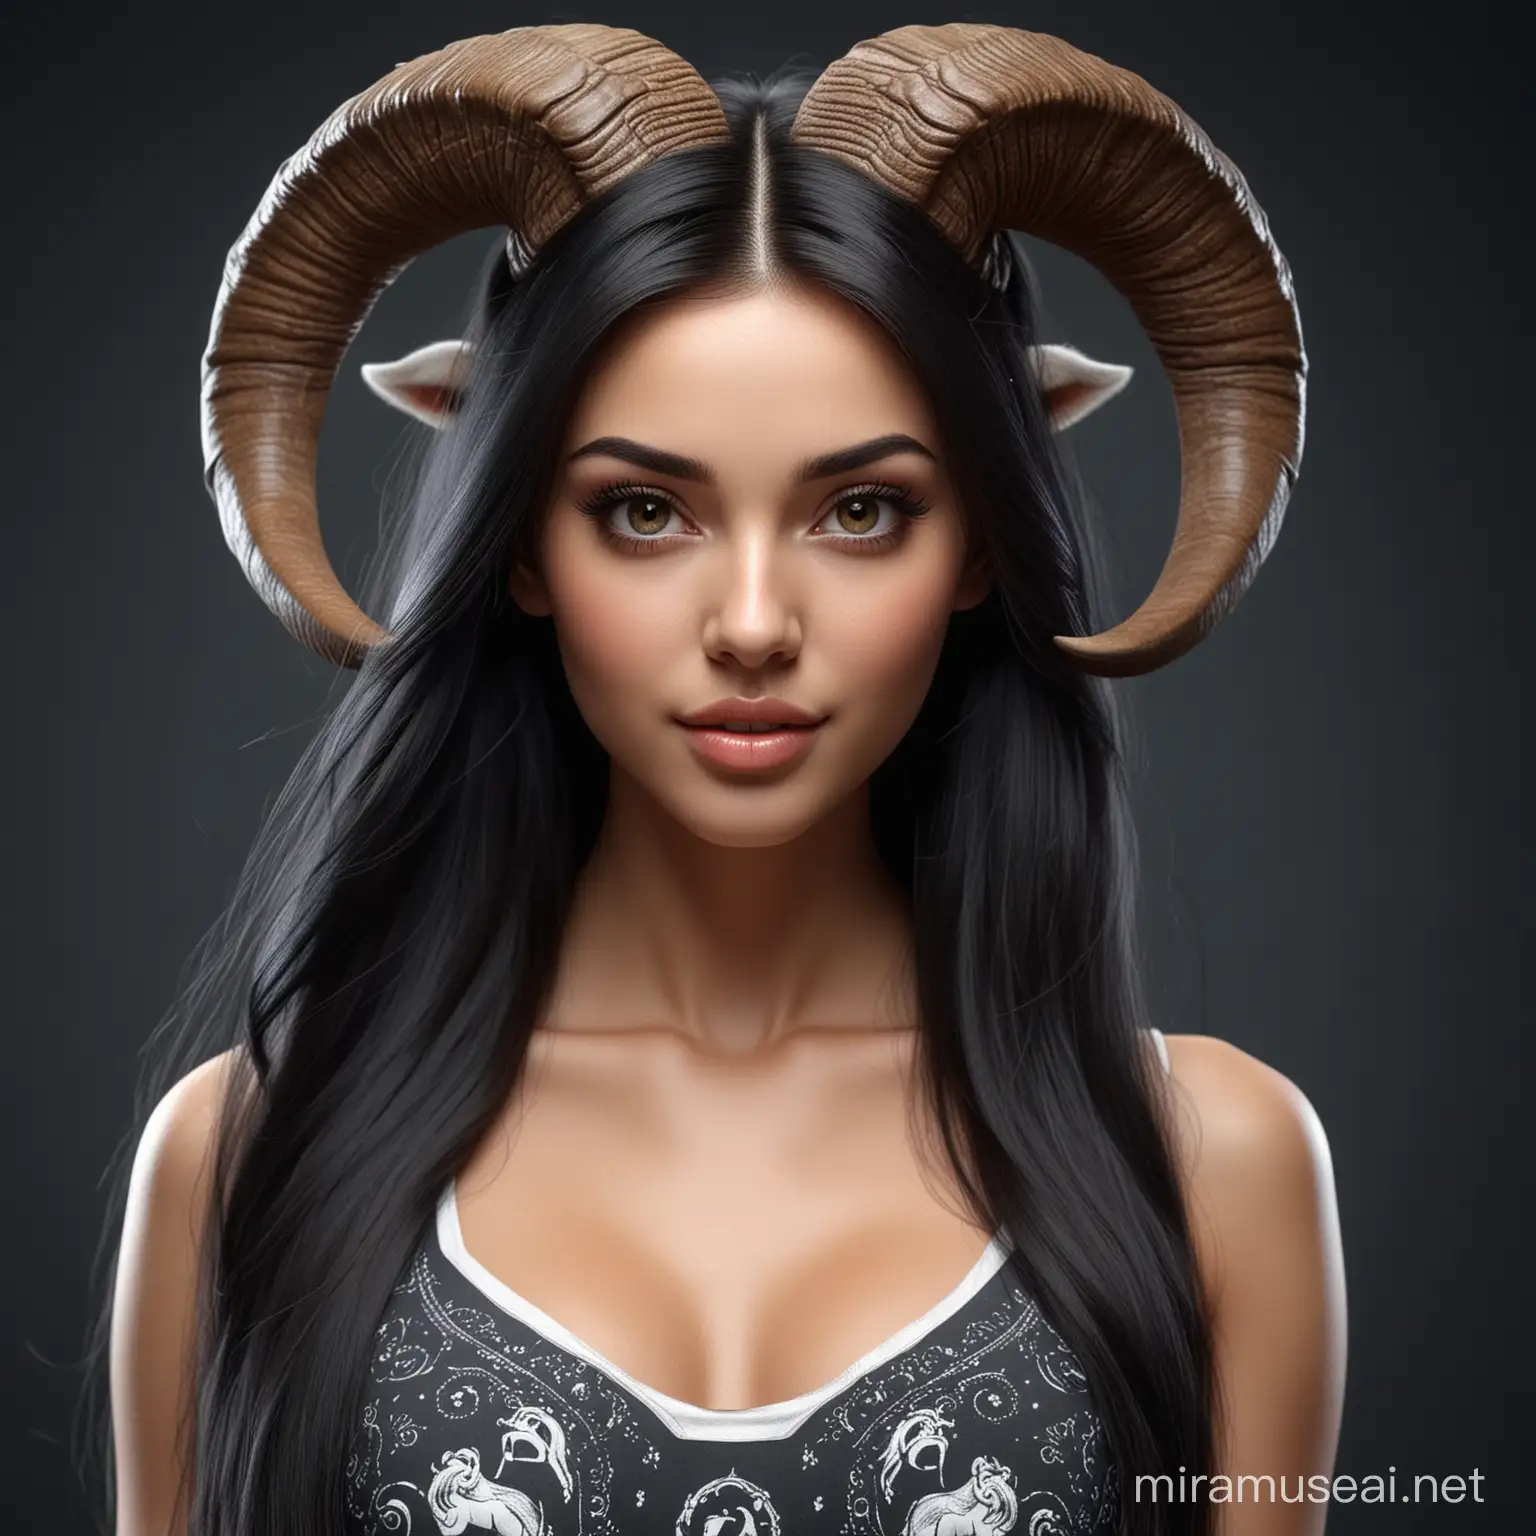 Stunning Ram Zodiac Woman with Perfect Body and Long Black Hair Hyper Realistic 8K Image